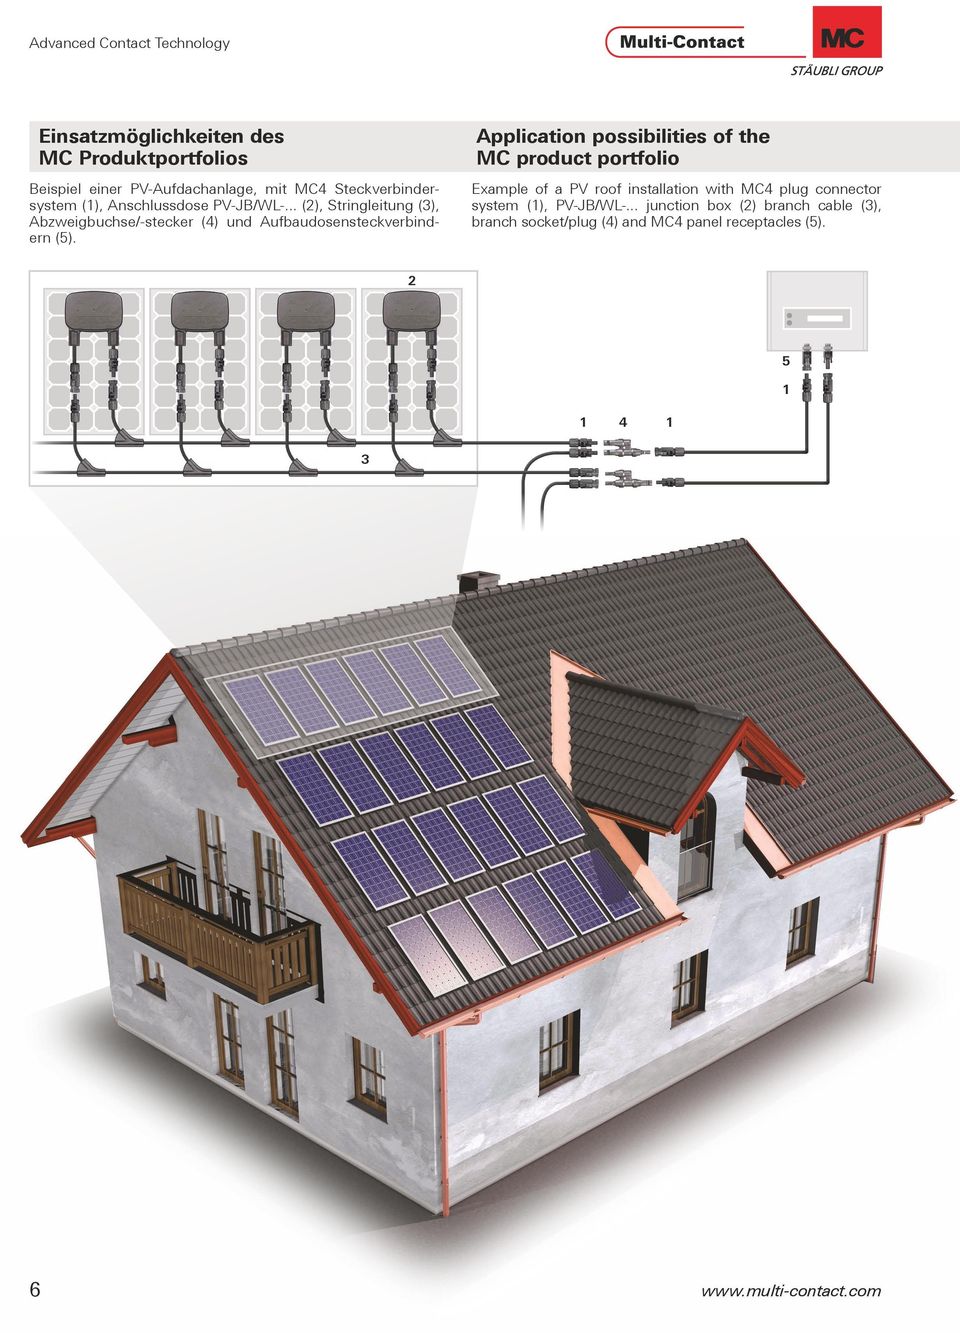 Application possibilities of the MC product portfolio Example of a PV roof installation with MC4 plug connector system (,